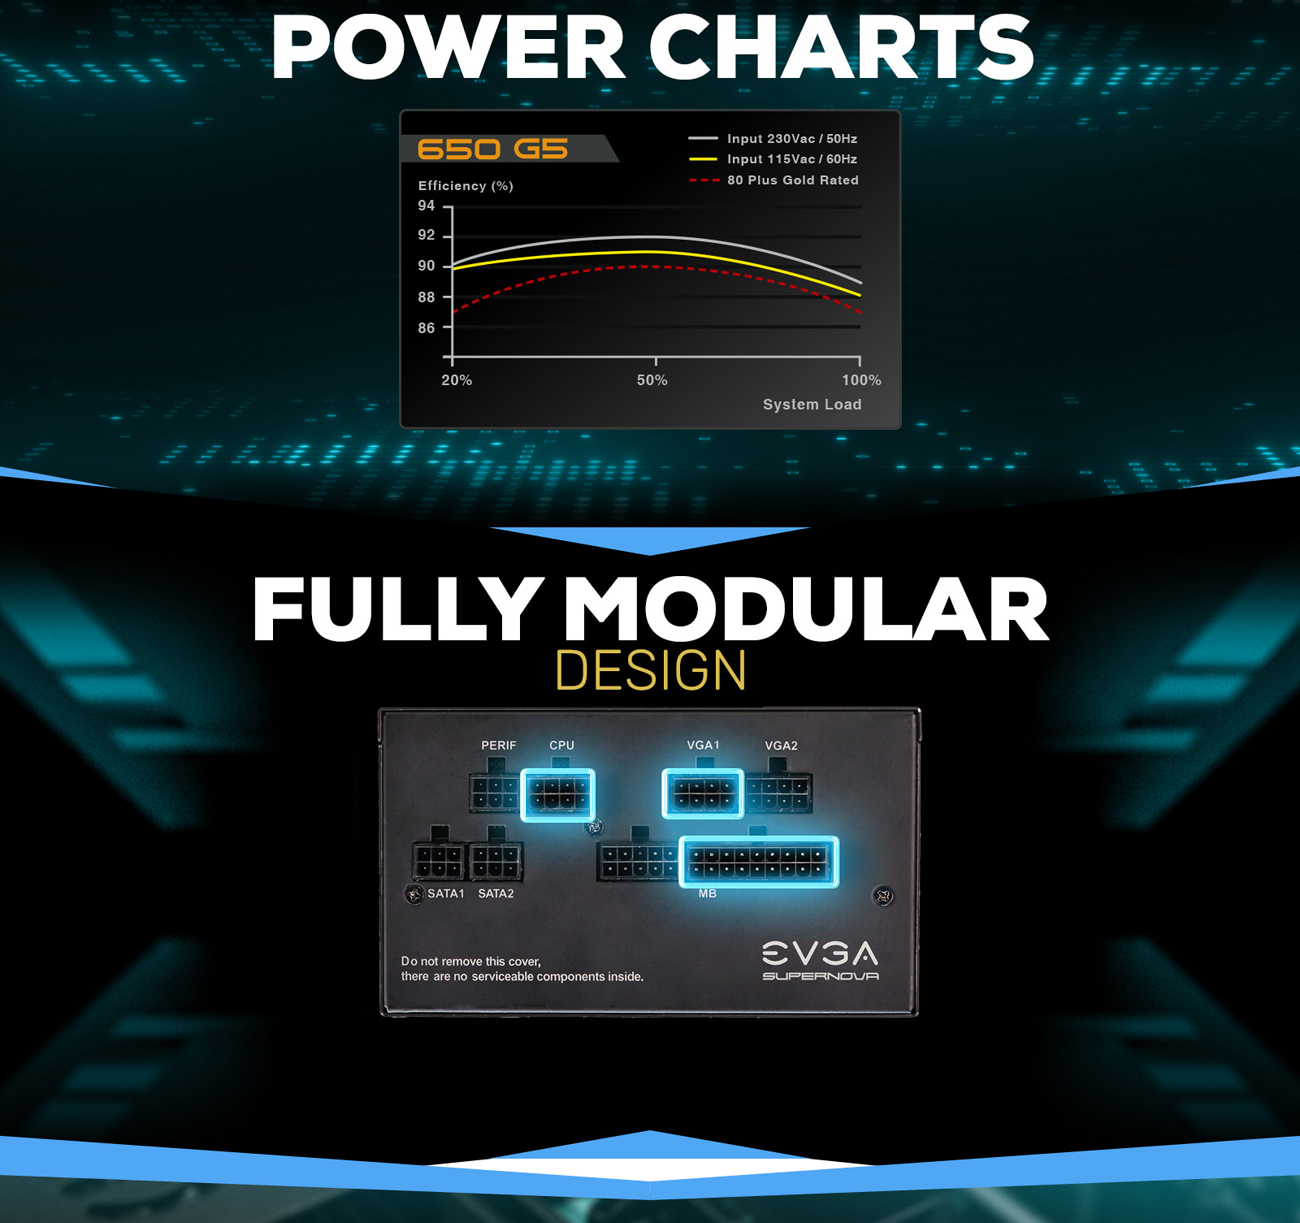 Power charts and fully modular ports